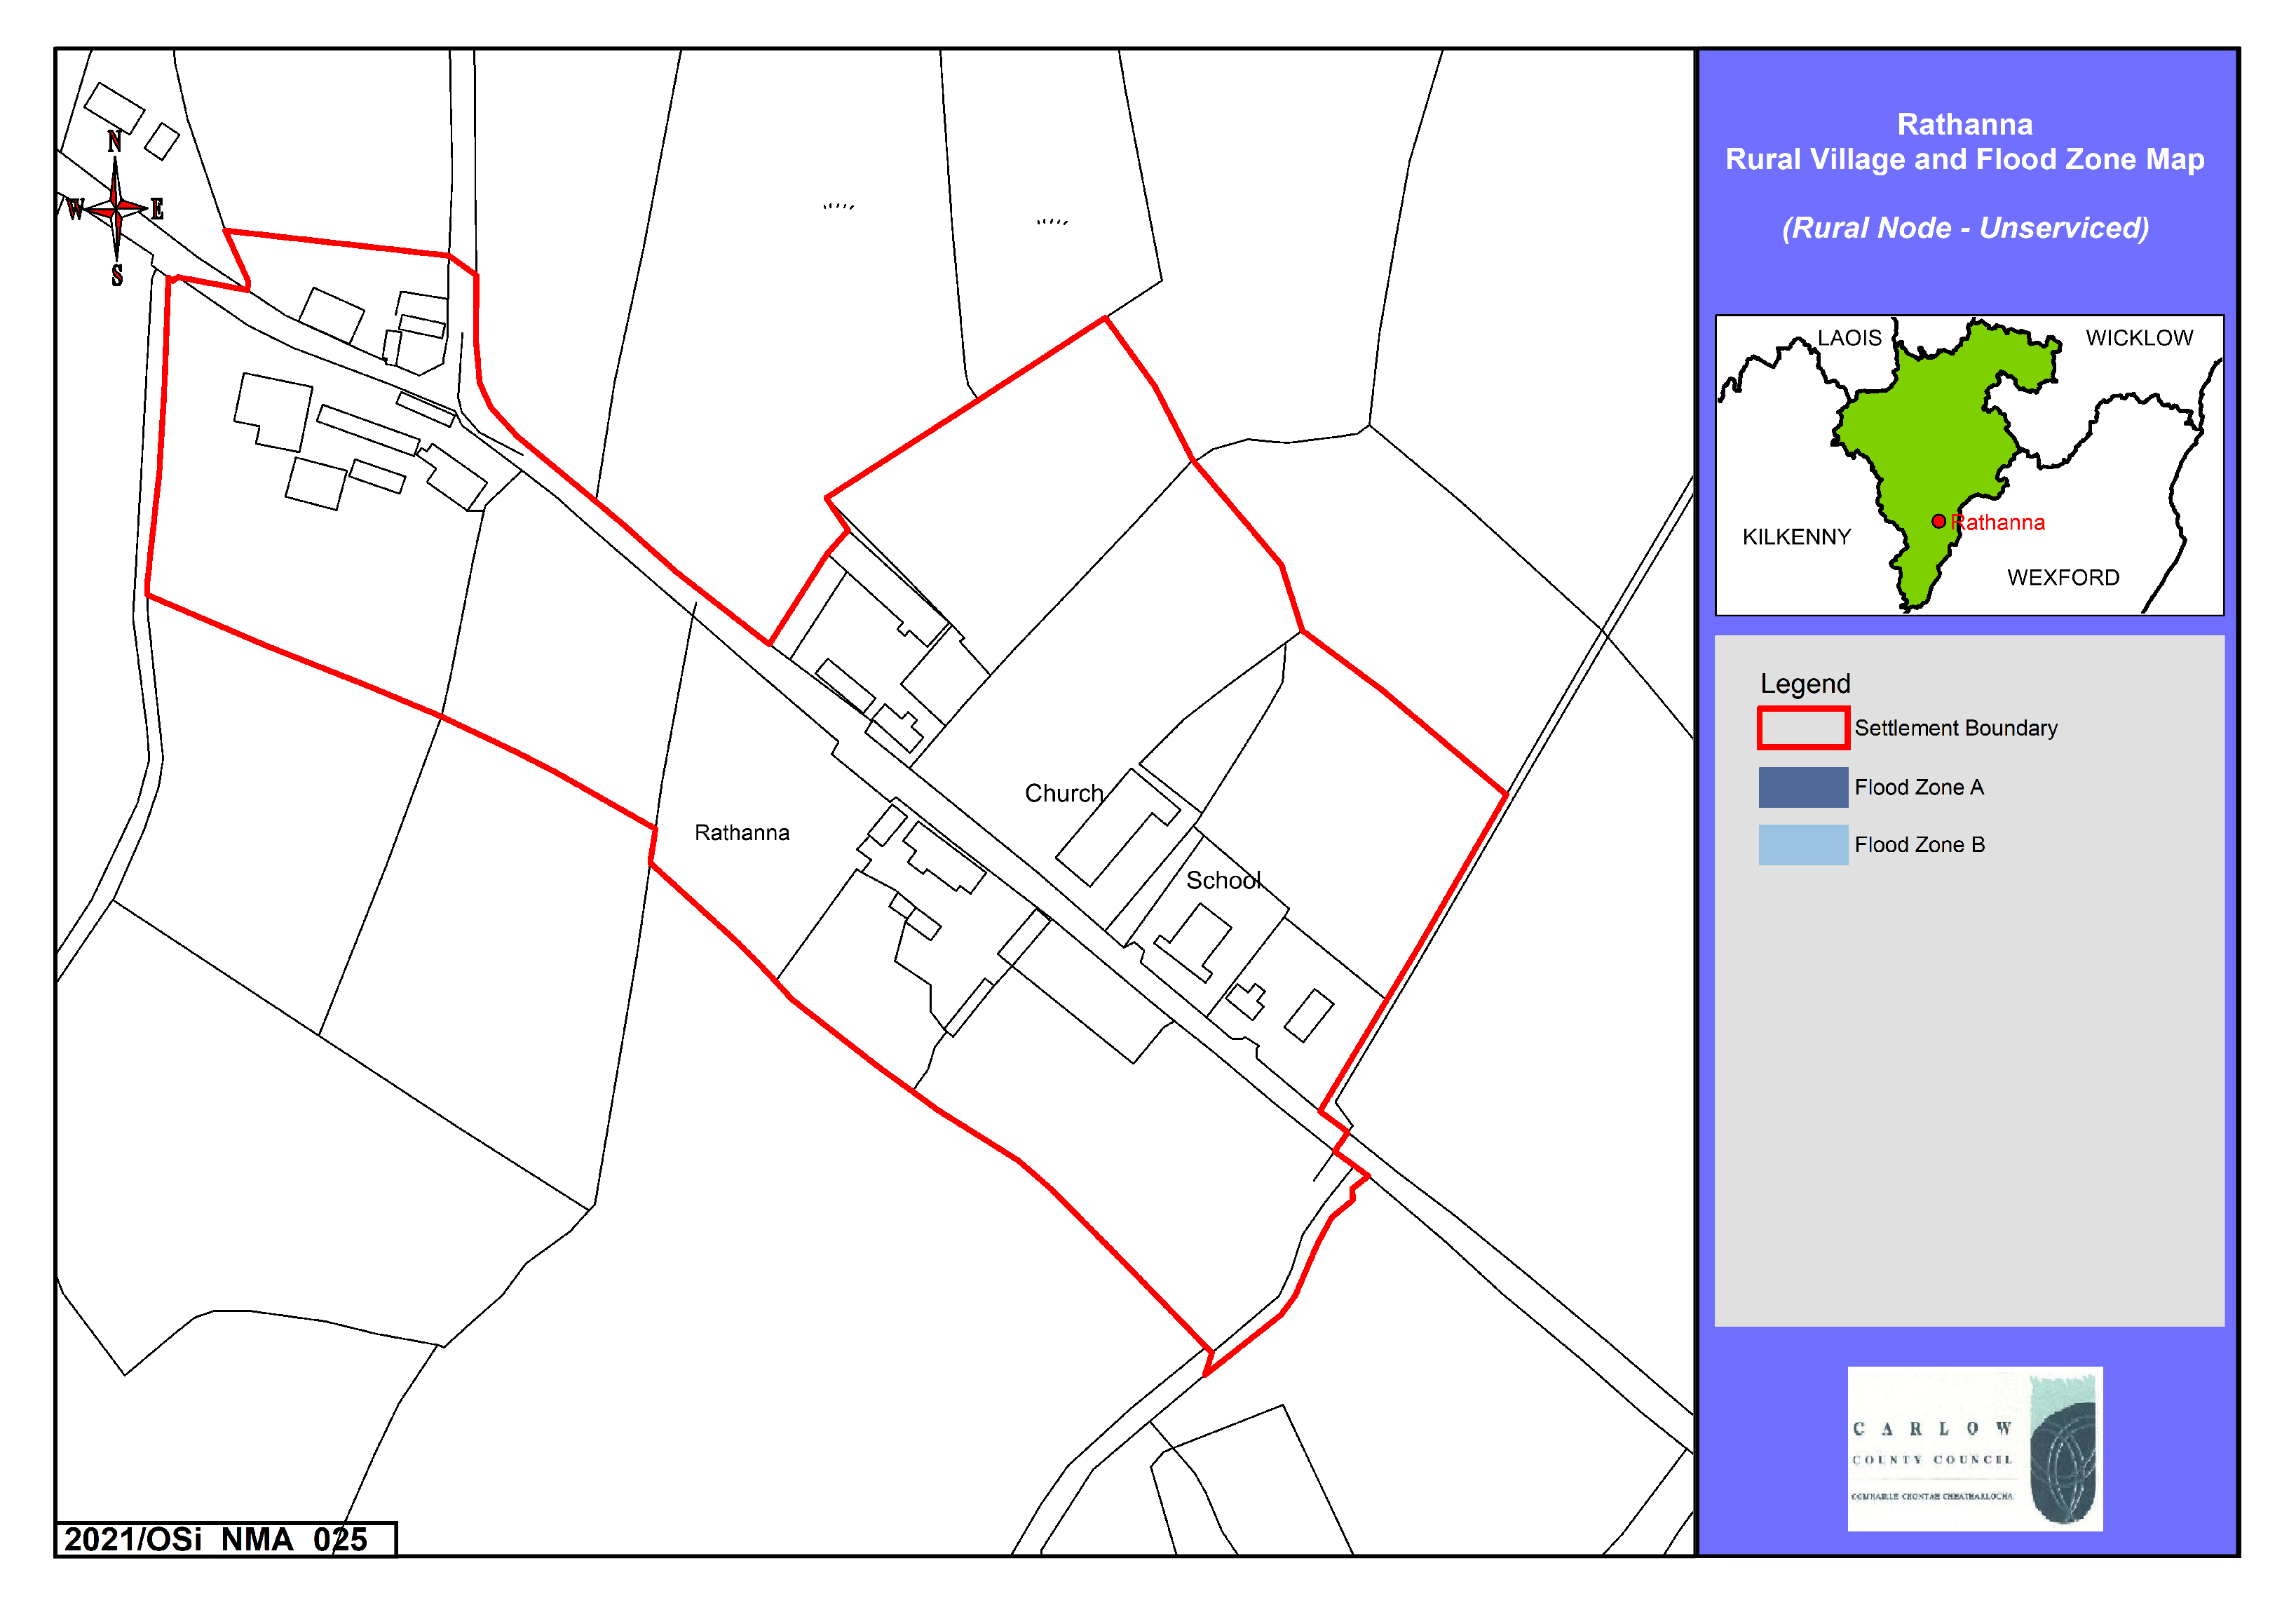 Rathanna Rural Village and Flood Zone Map